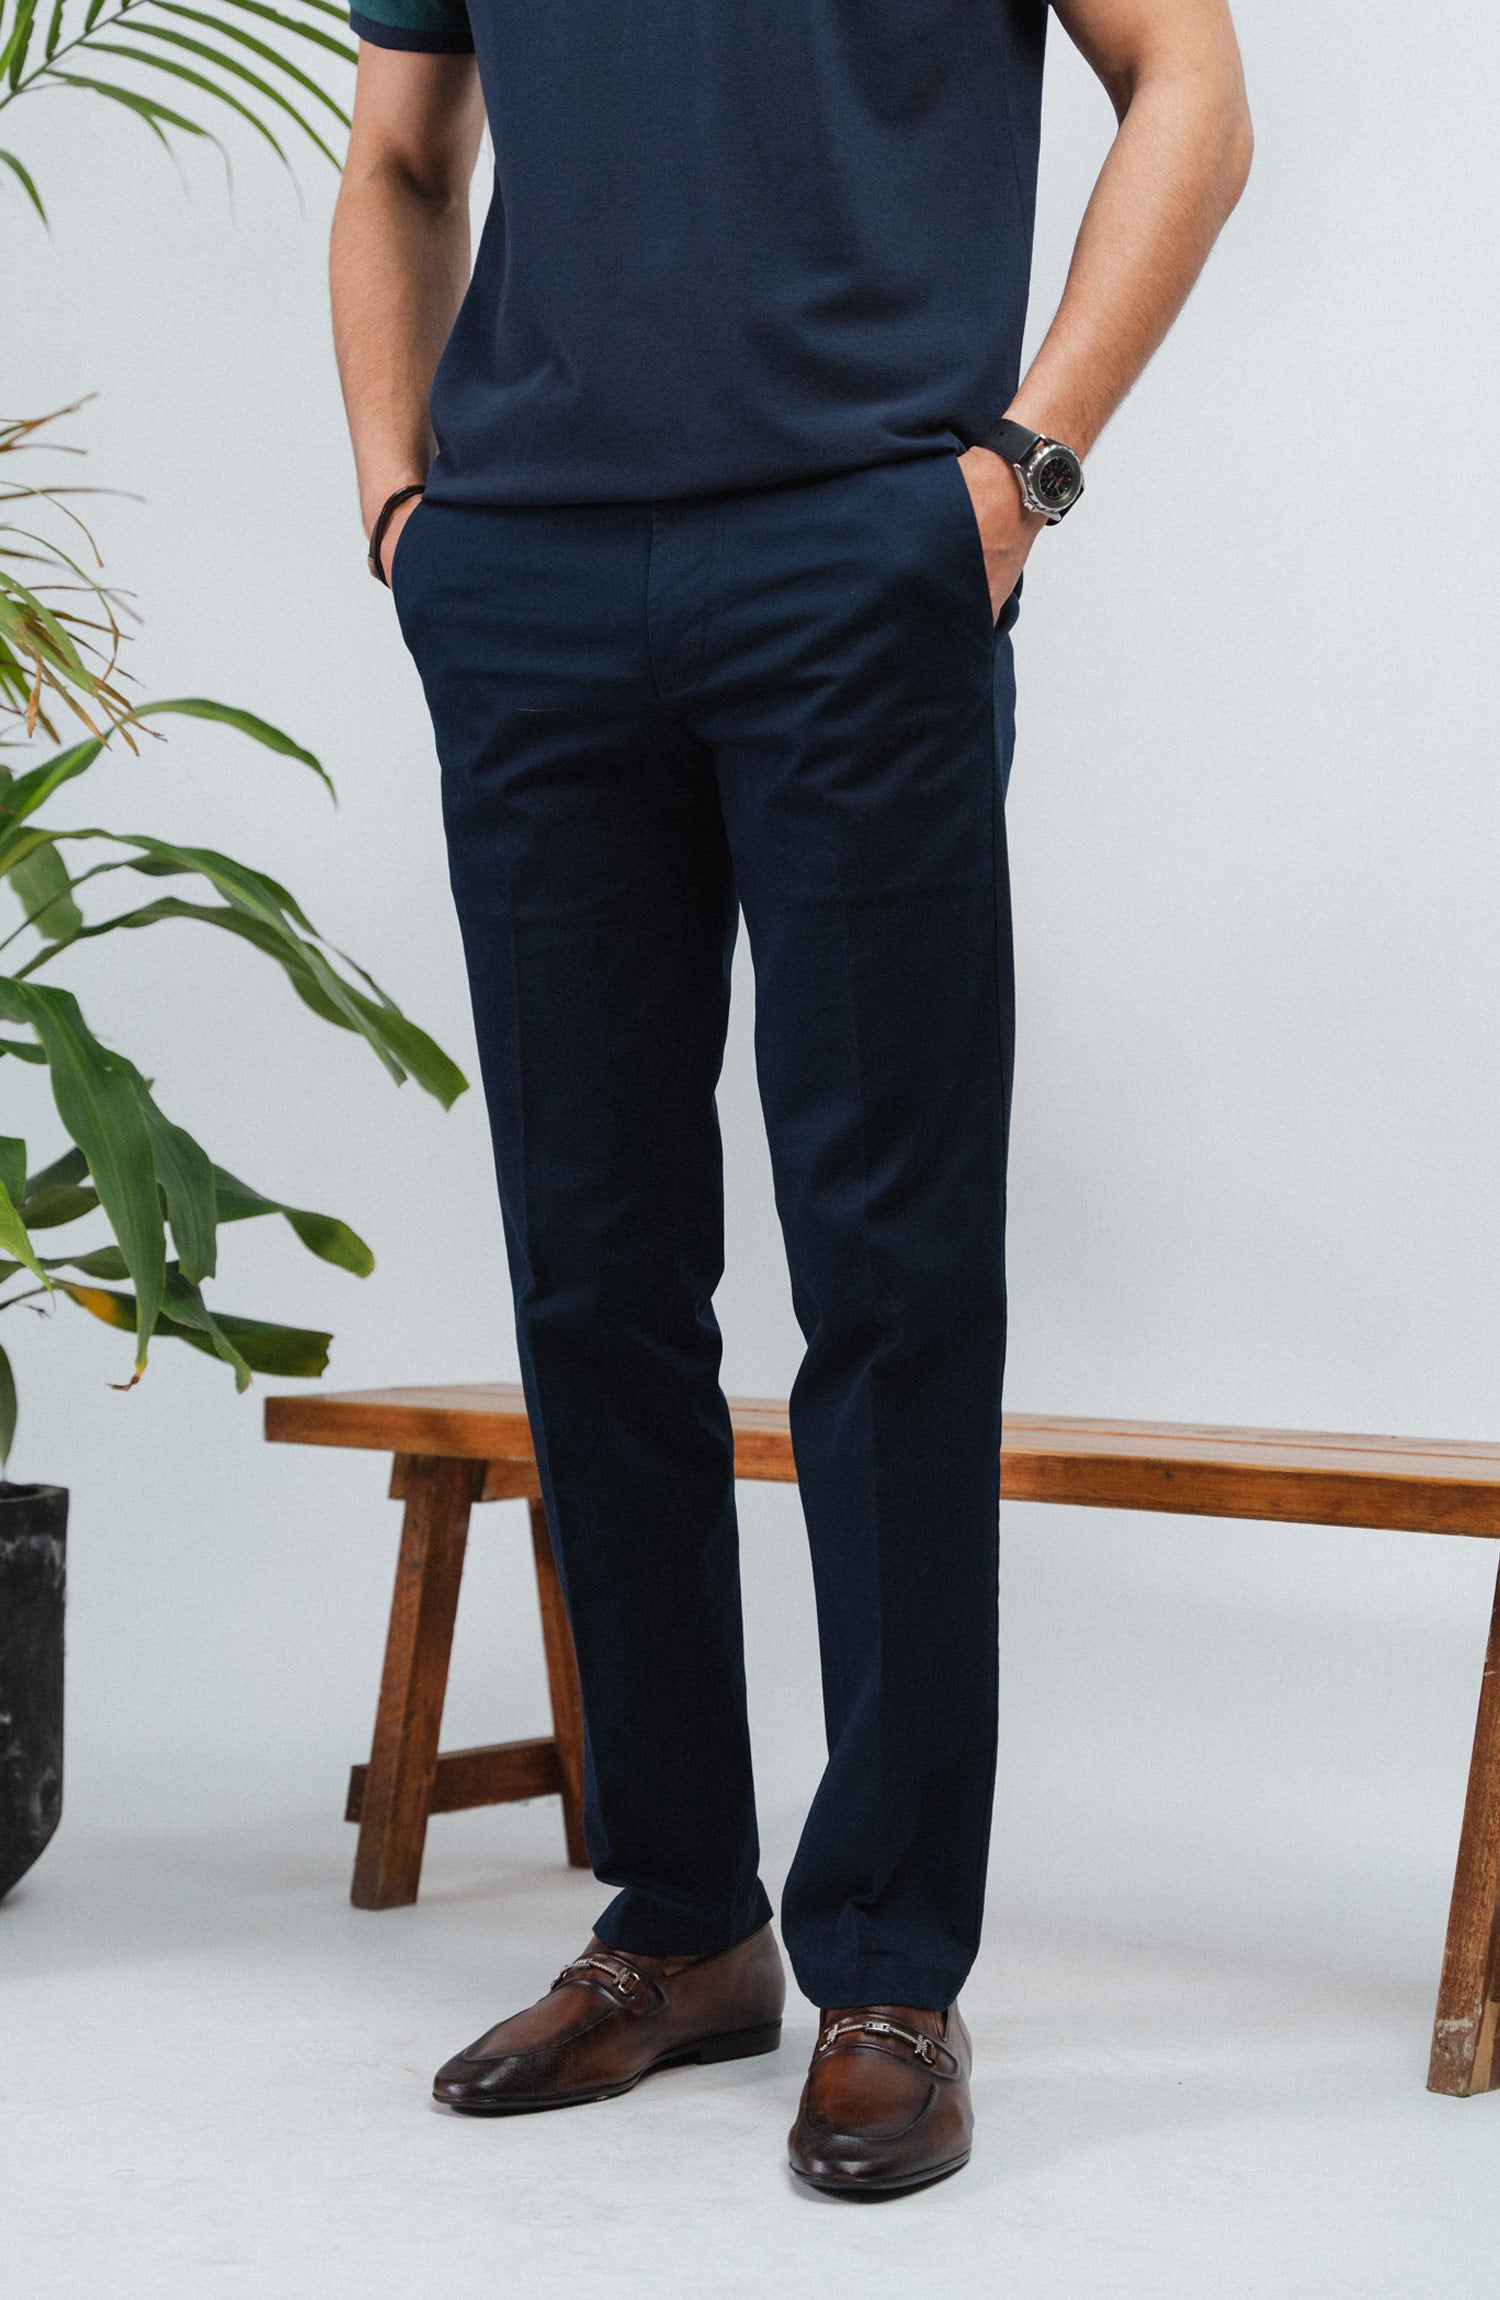 How to Style Navy Blue Dress Pants | The Suit Depot